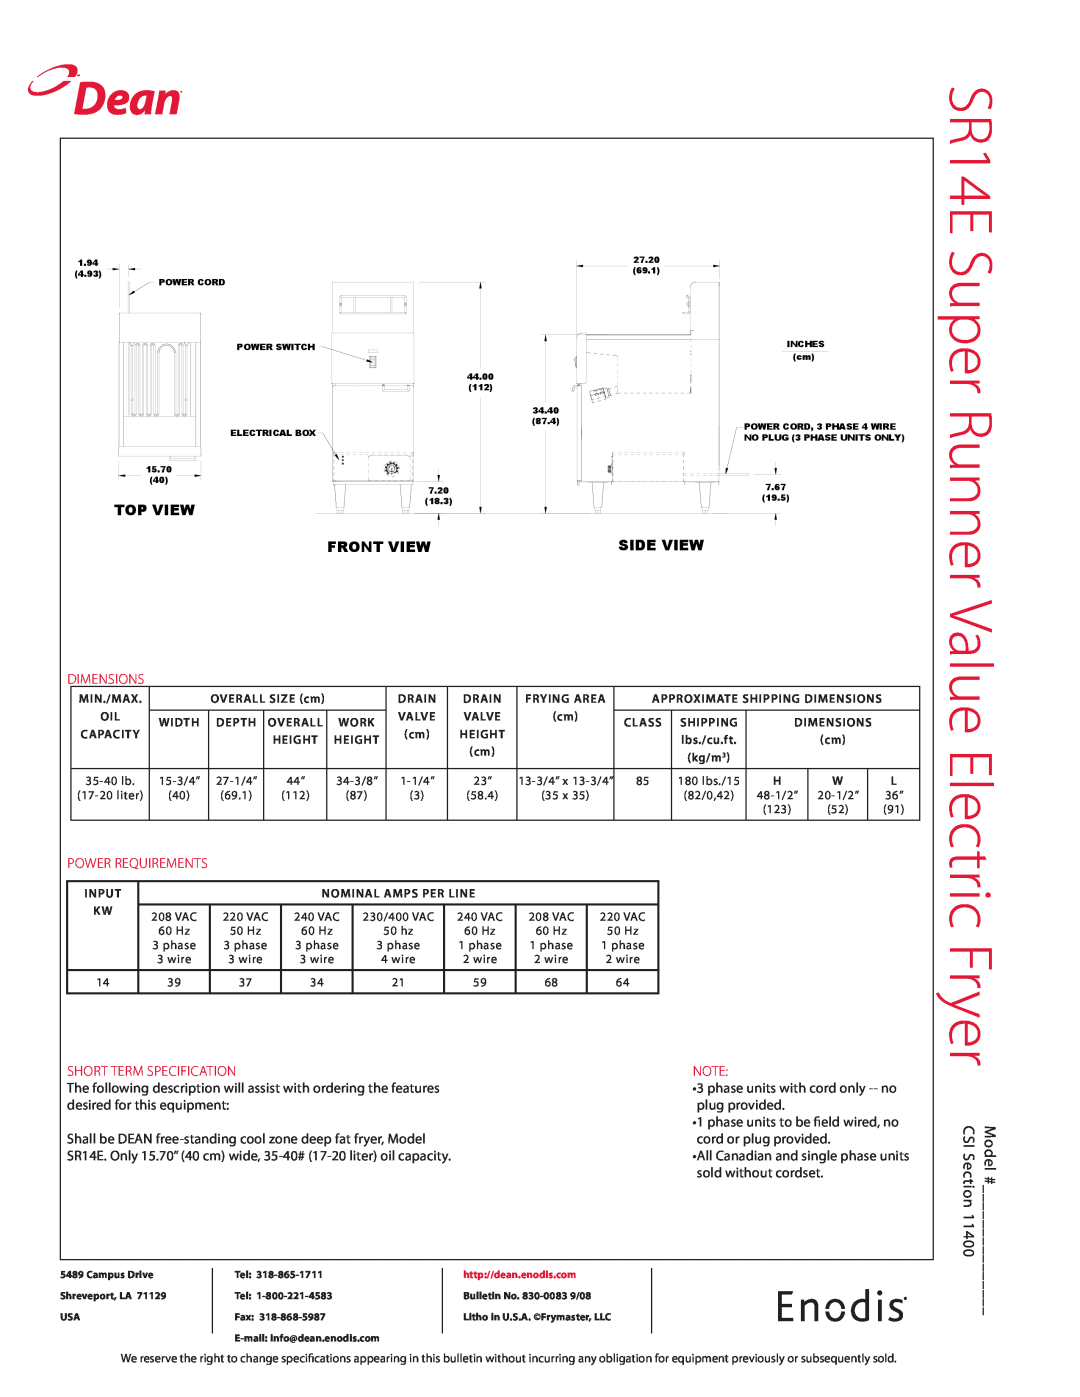 Frymaster SR14E Dean, Top View, Front View, Side View, dimensions, power requirements, short term specification 